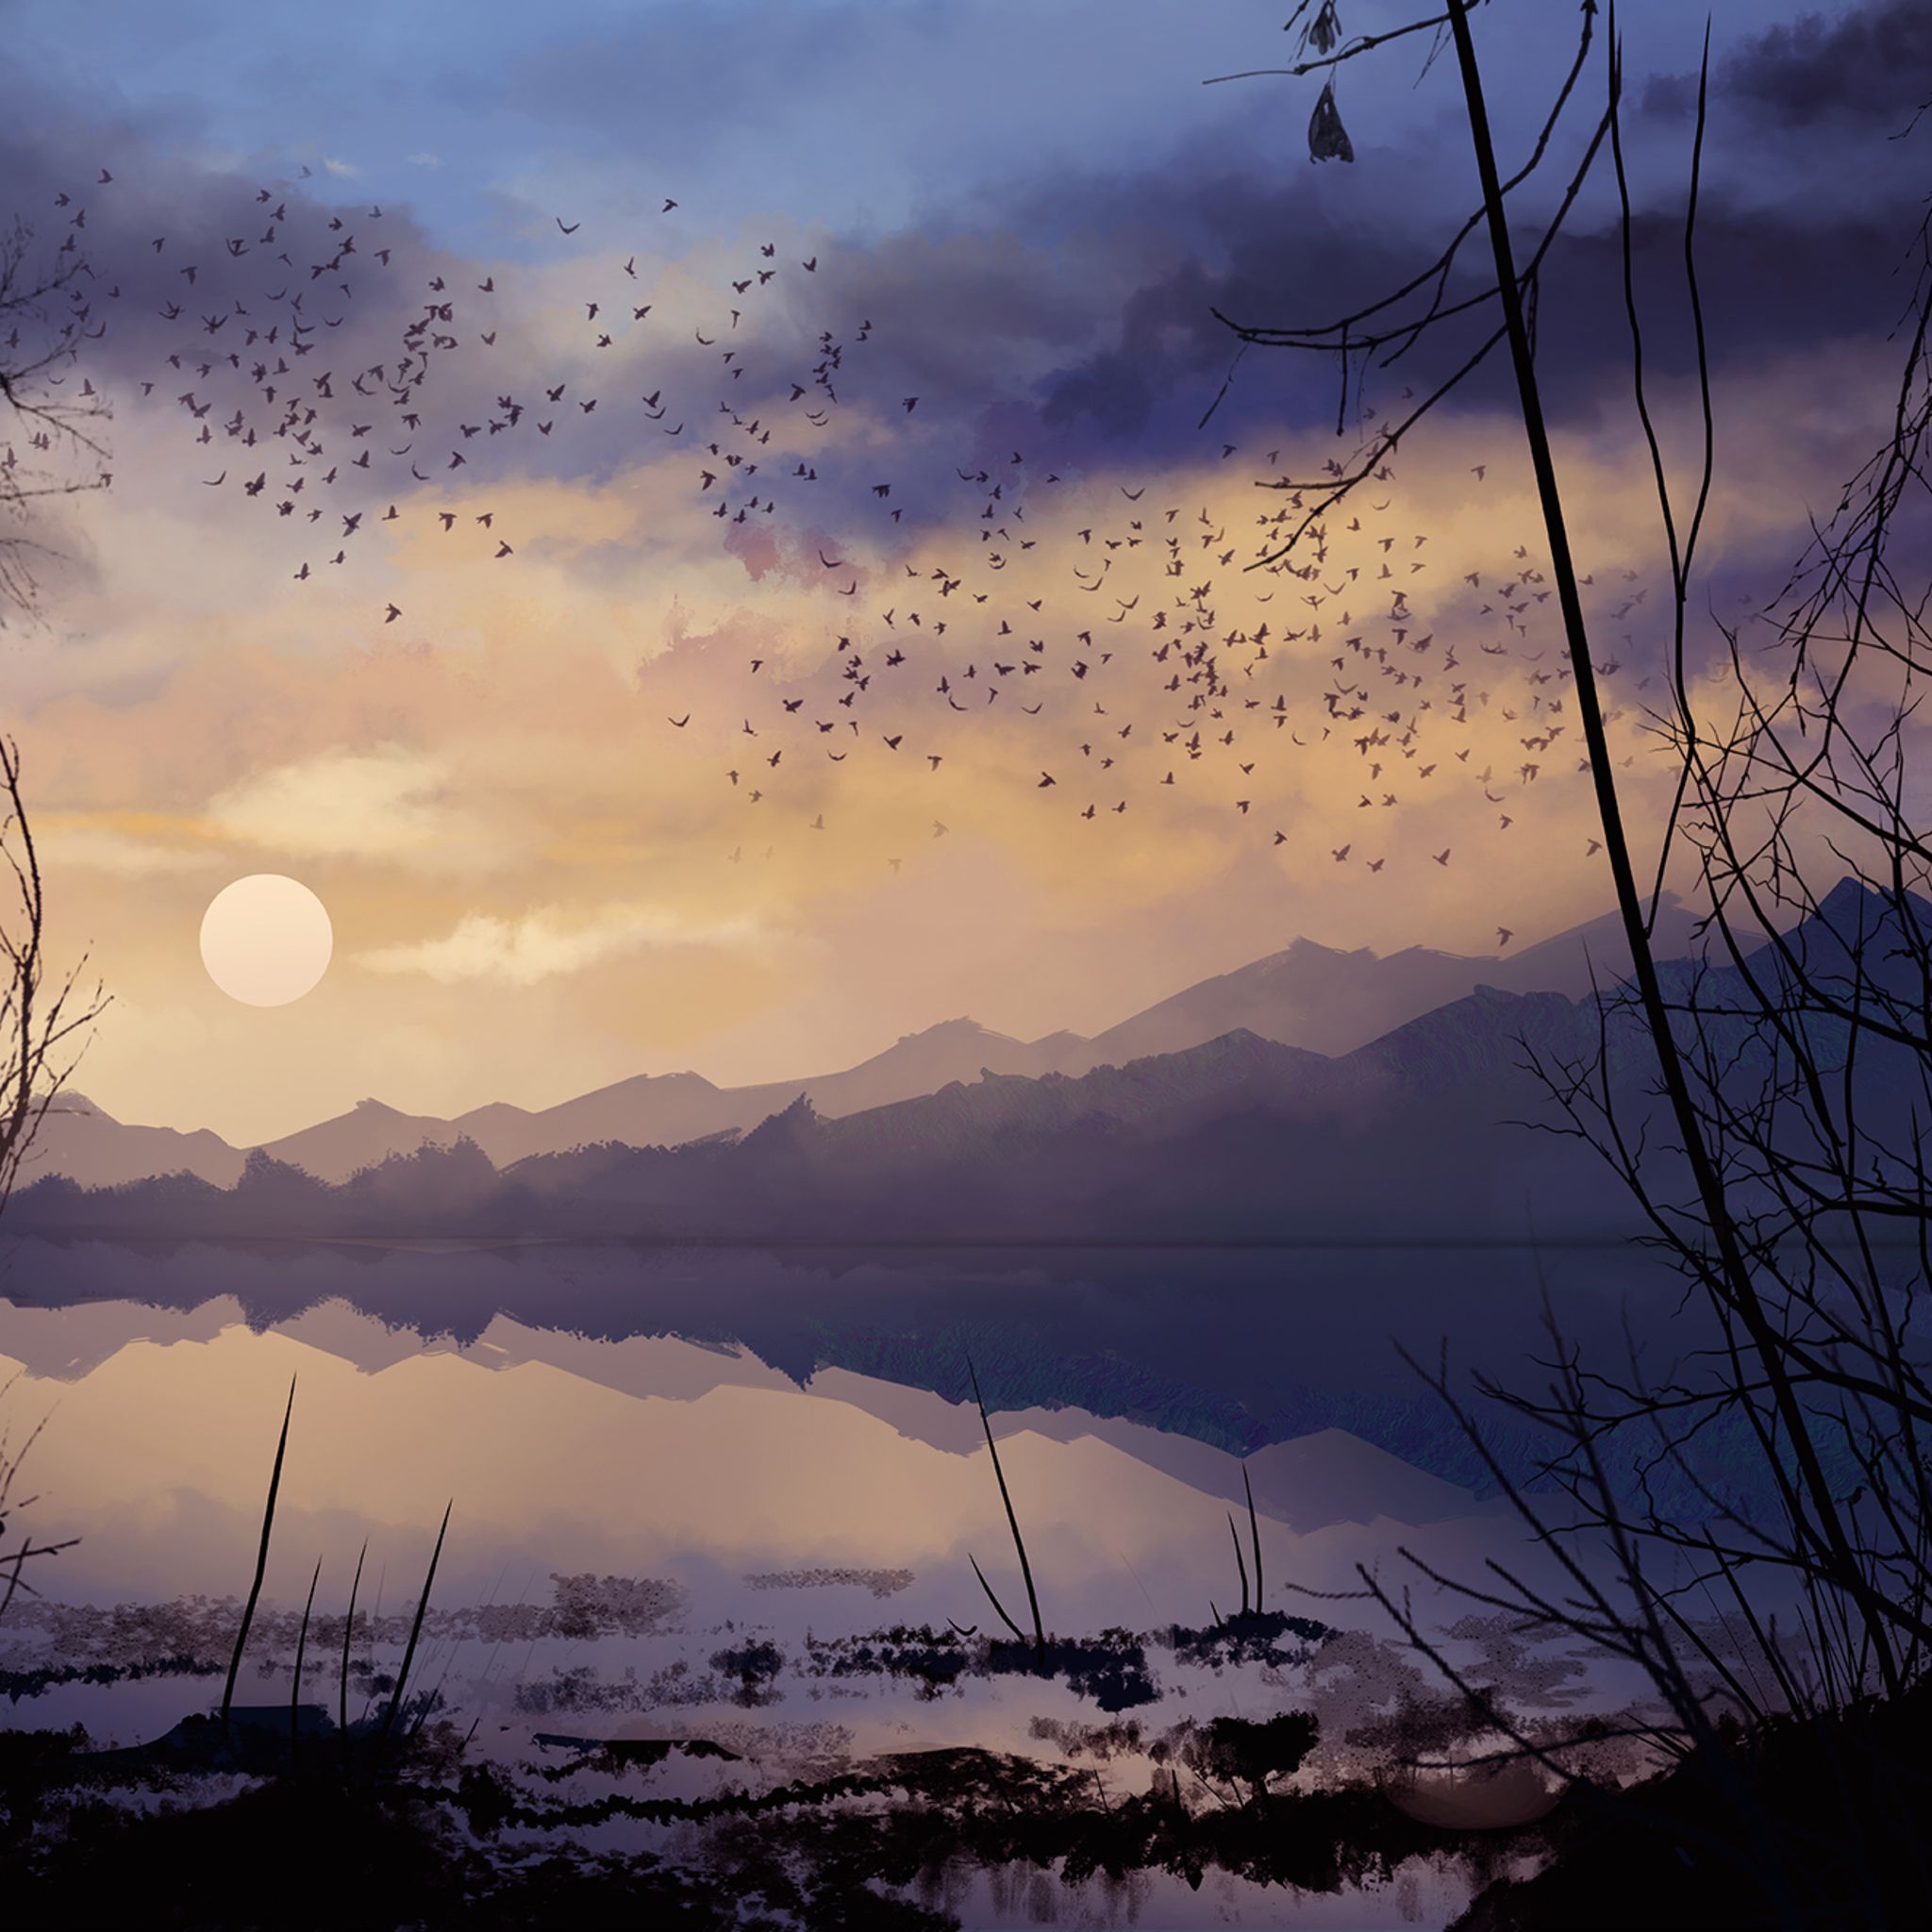 A painting of a flock of birds flying over a lake - Lake